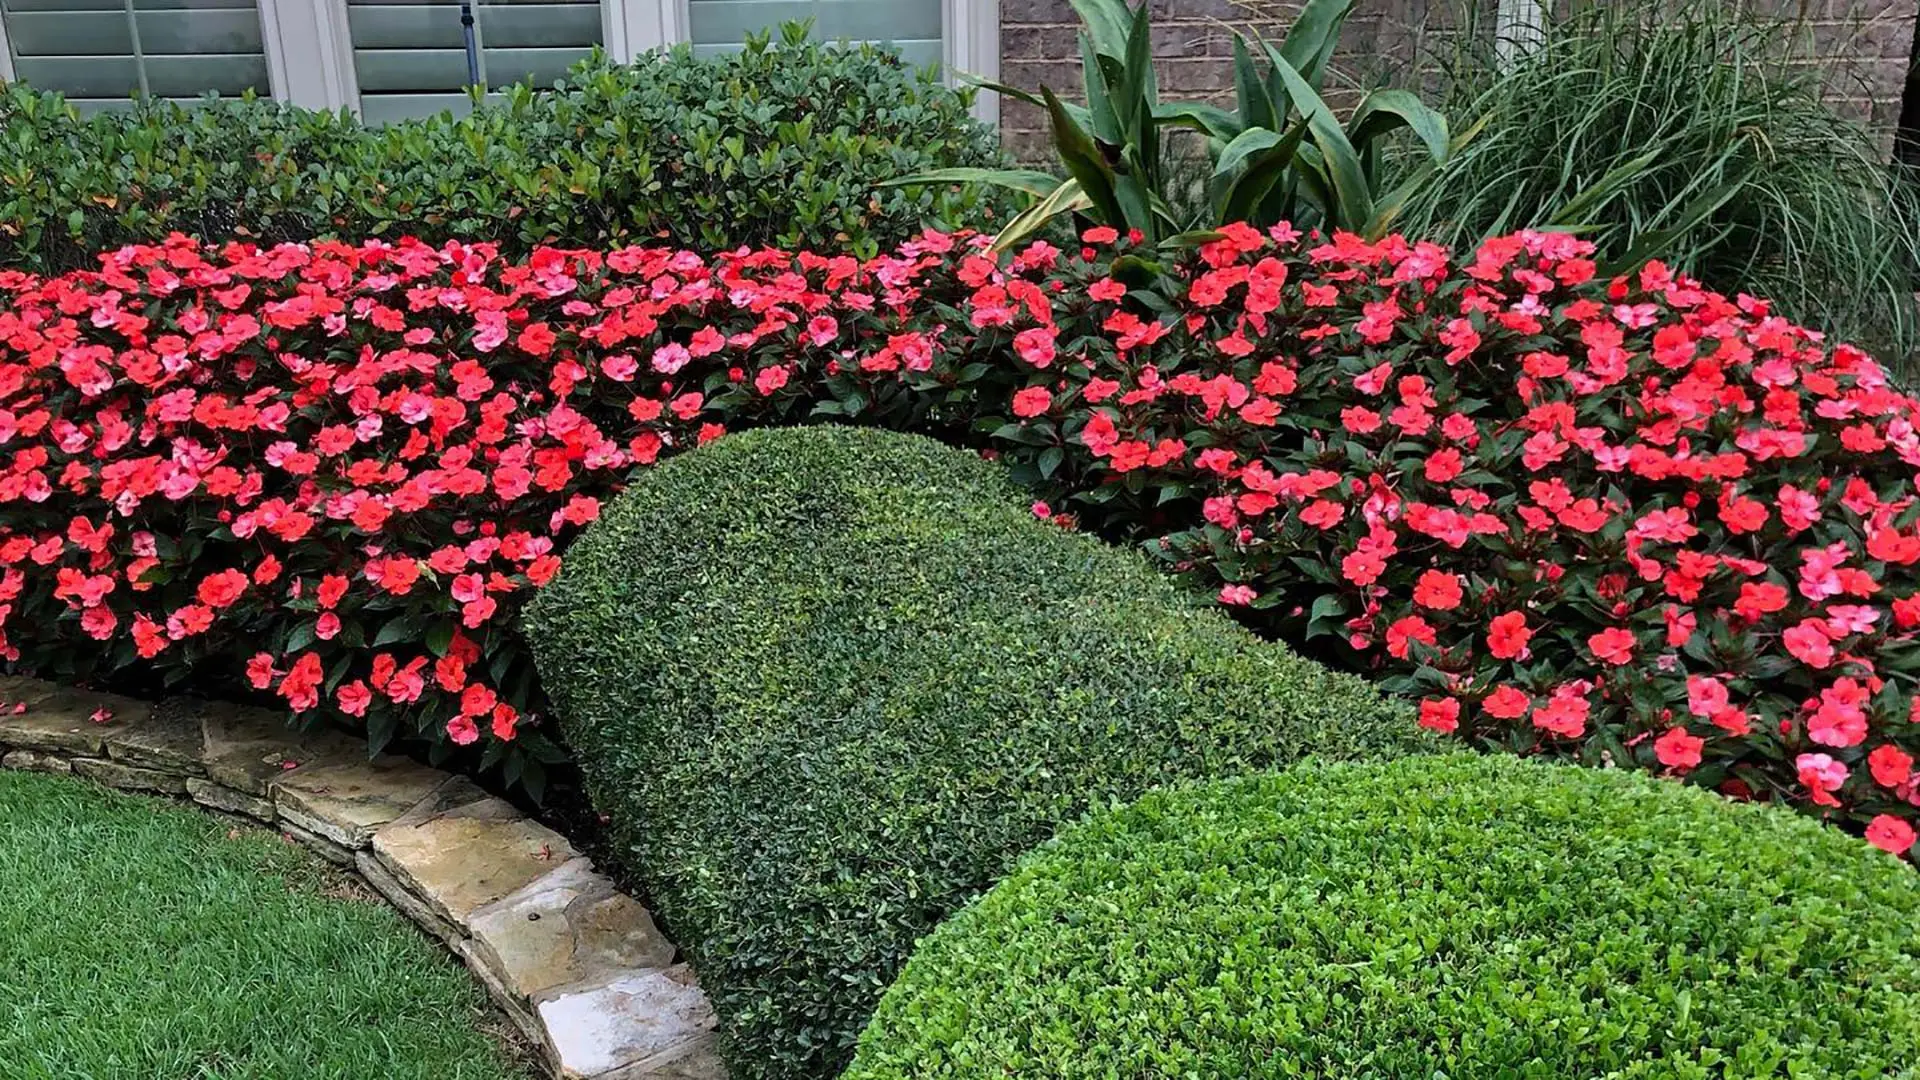 A landscape bed of well trimmed bushes and red flowers by a home in Arlington, TN.